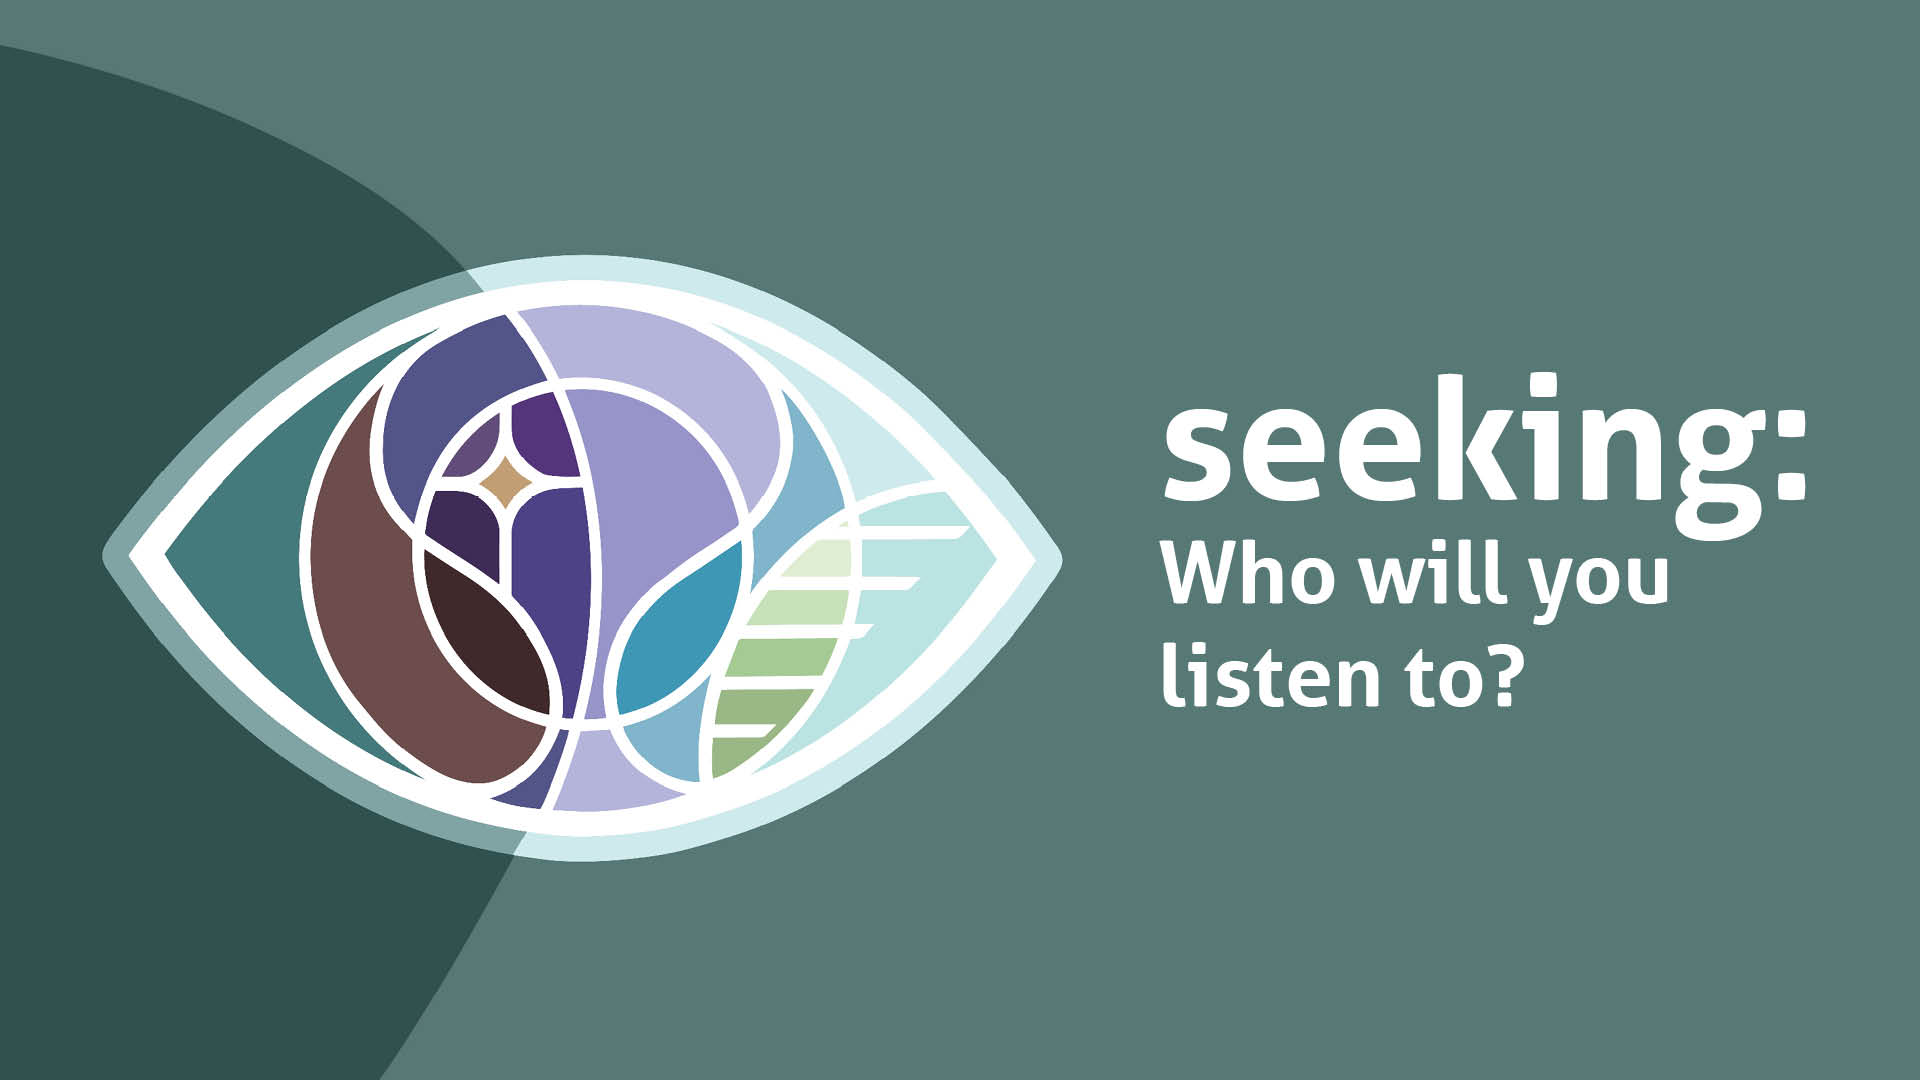 eye image icon with text "who will you listen to?"